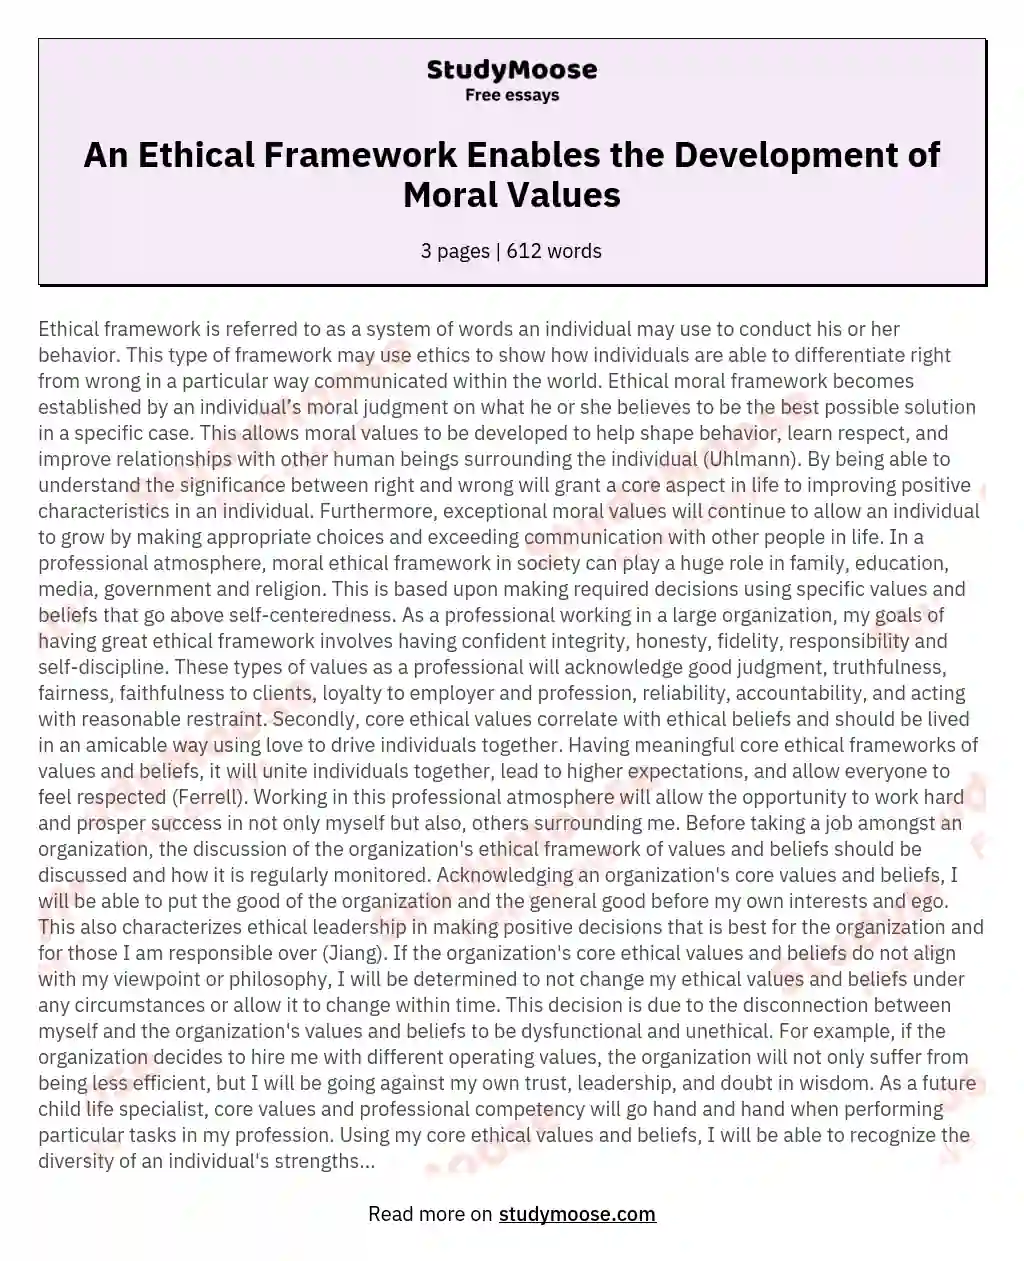 An Ethical Framework Enables the Development of Moral Values essay